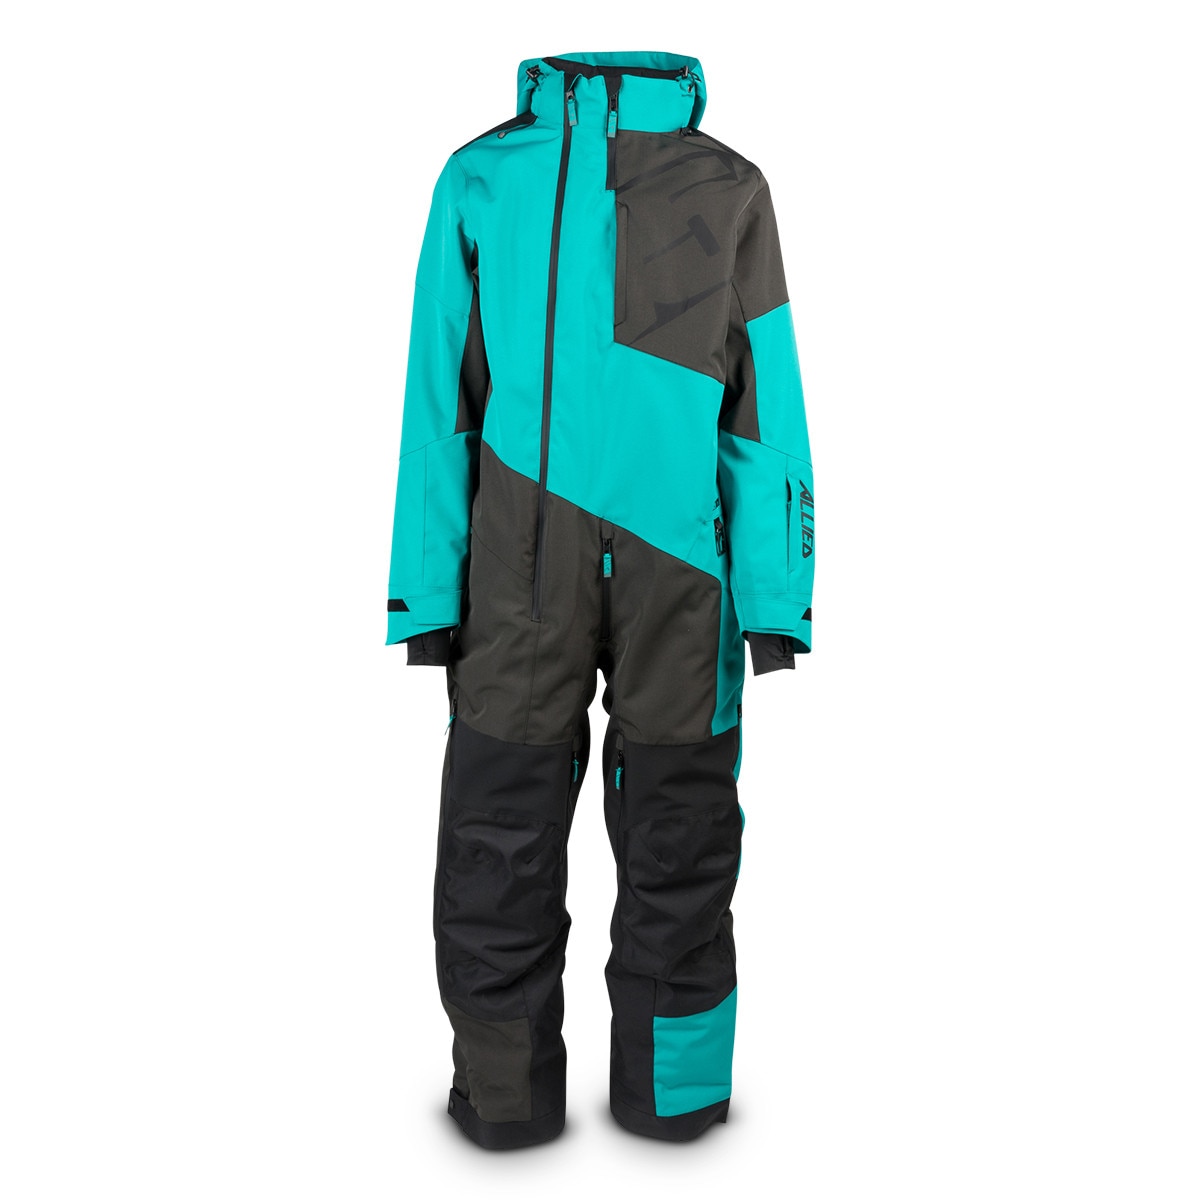 Monosuit 509 Allied Insulated, Emerald